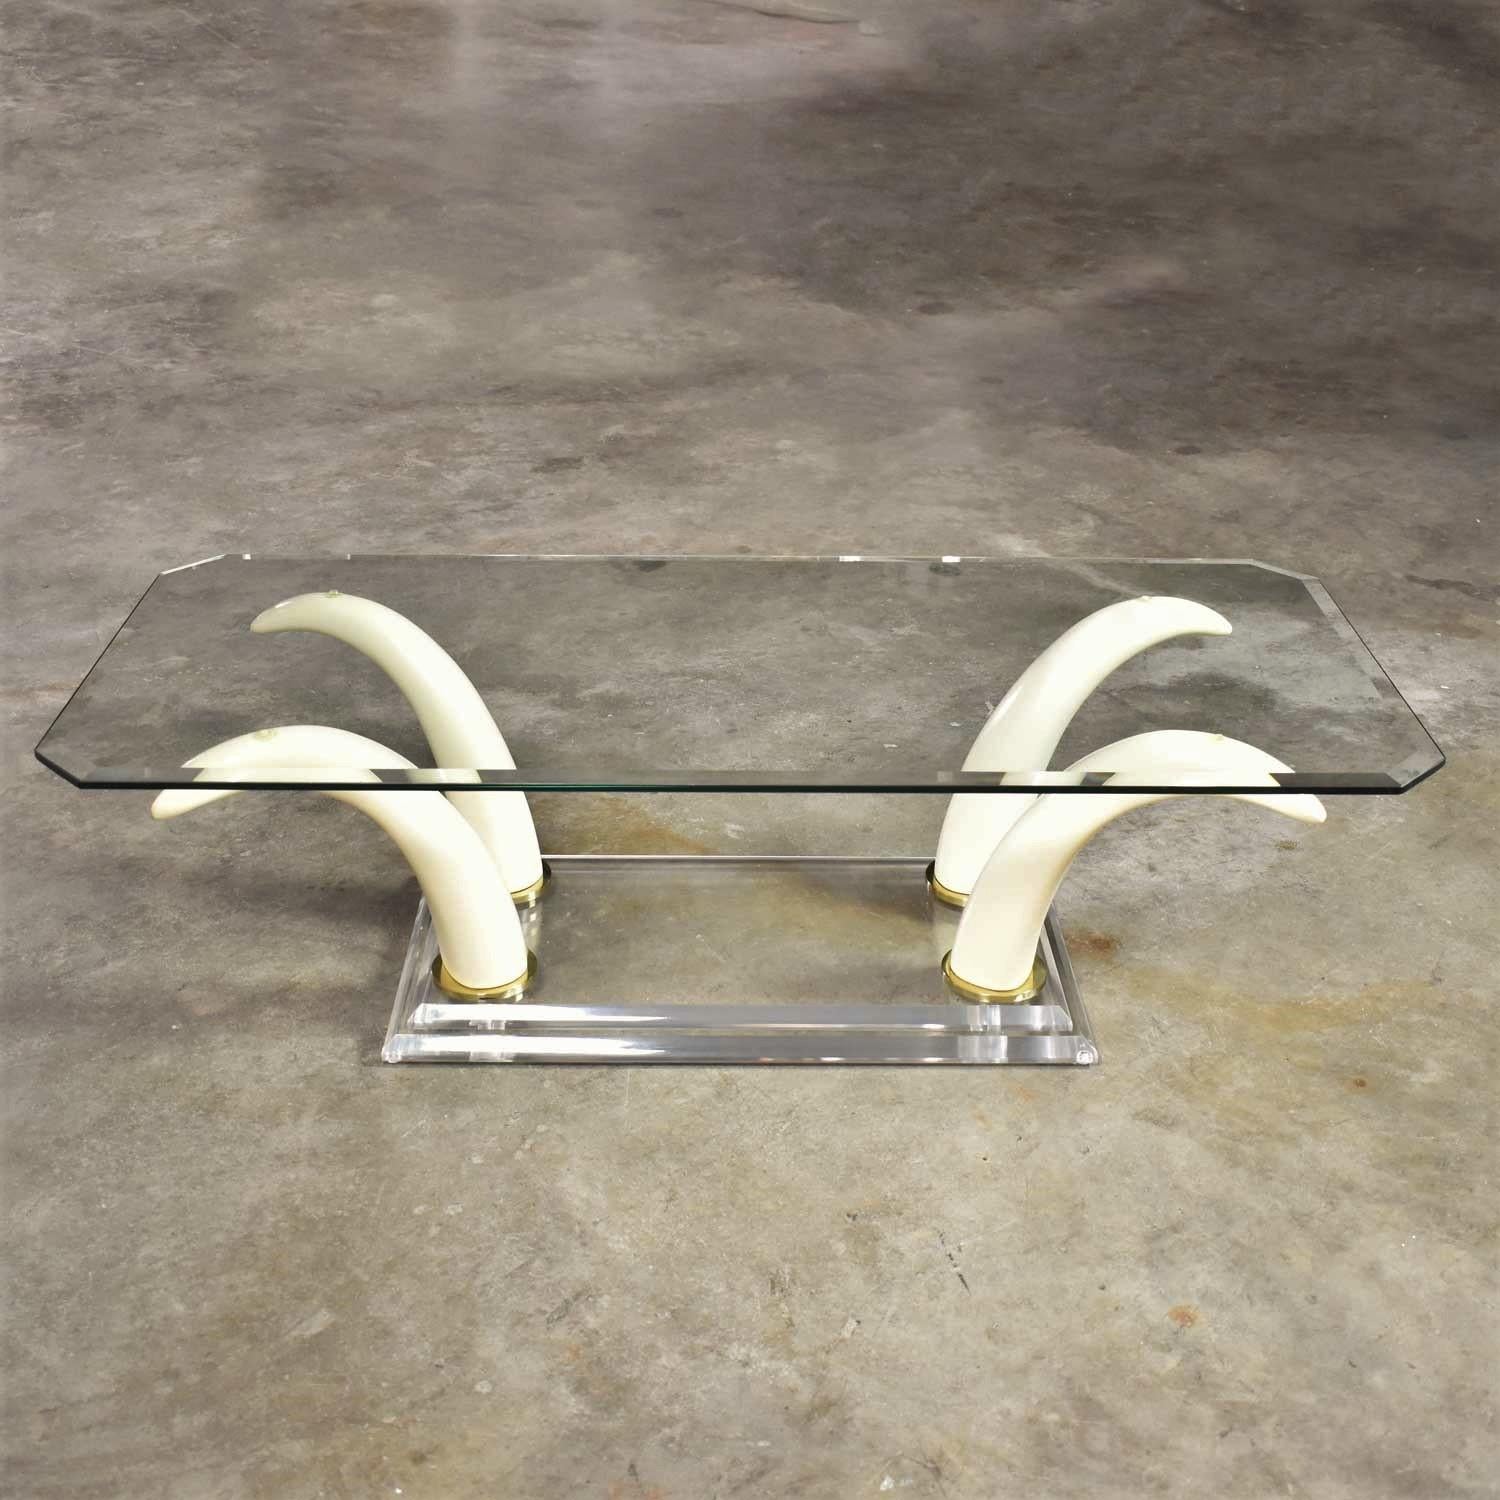 Hollywood Regency Lucite Acrylic and Glass Faux Tusk Coffee Cocktail Table after Maison Jansen